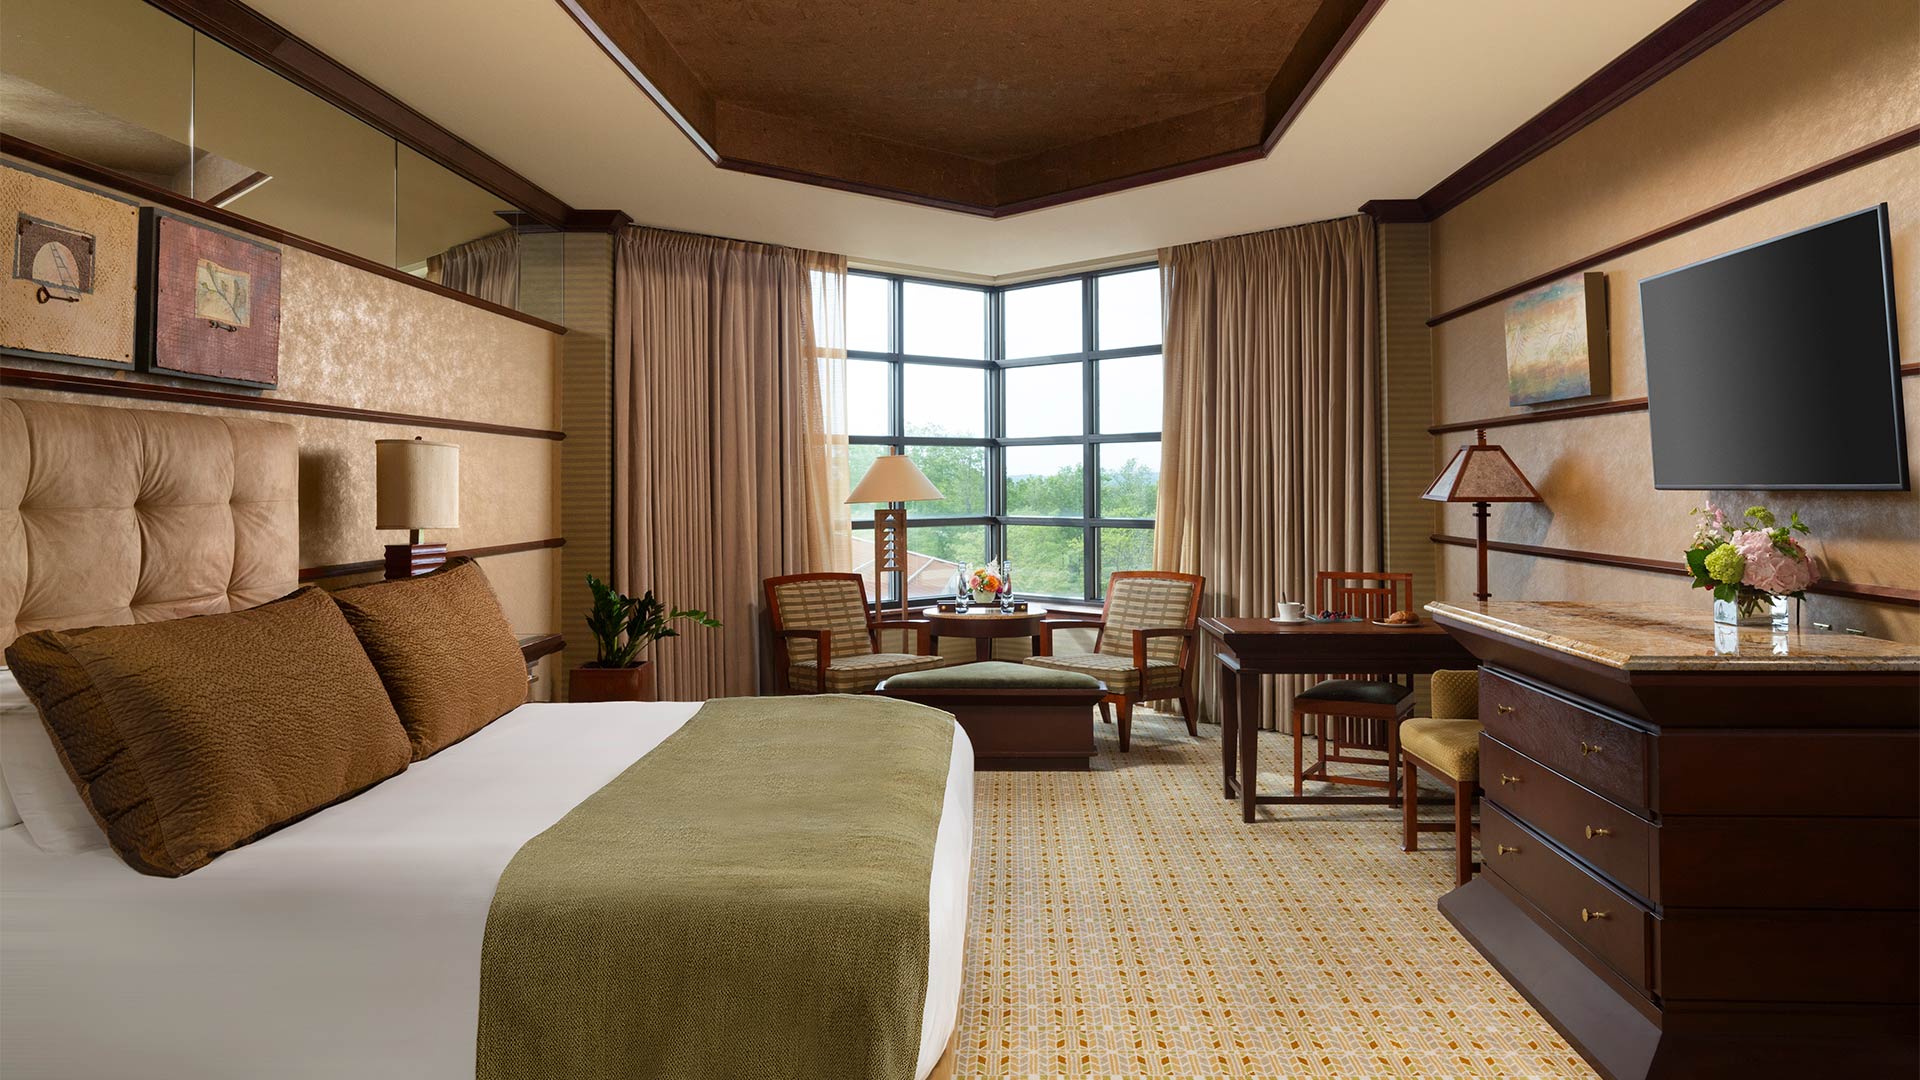 This is an interior shot of Falling Rock's luxury king room. There is a bed with a plush headboard and white, green and brown bedding. There is a sitting area with a table and dresser across from the bed. There are windows overlooking the resort grounds. Next Slide for other carousel items.